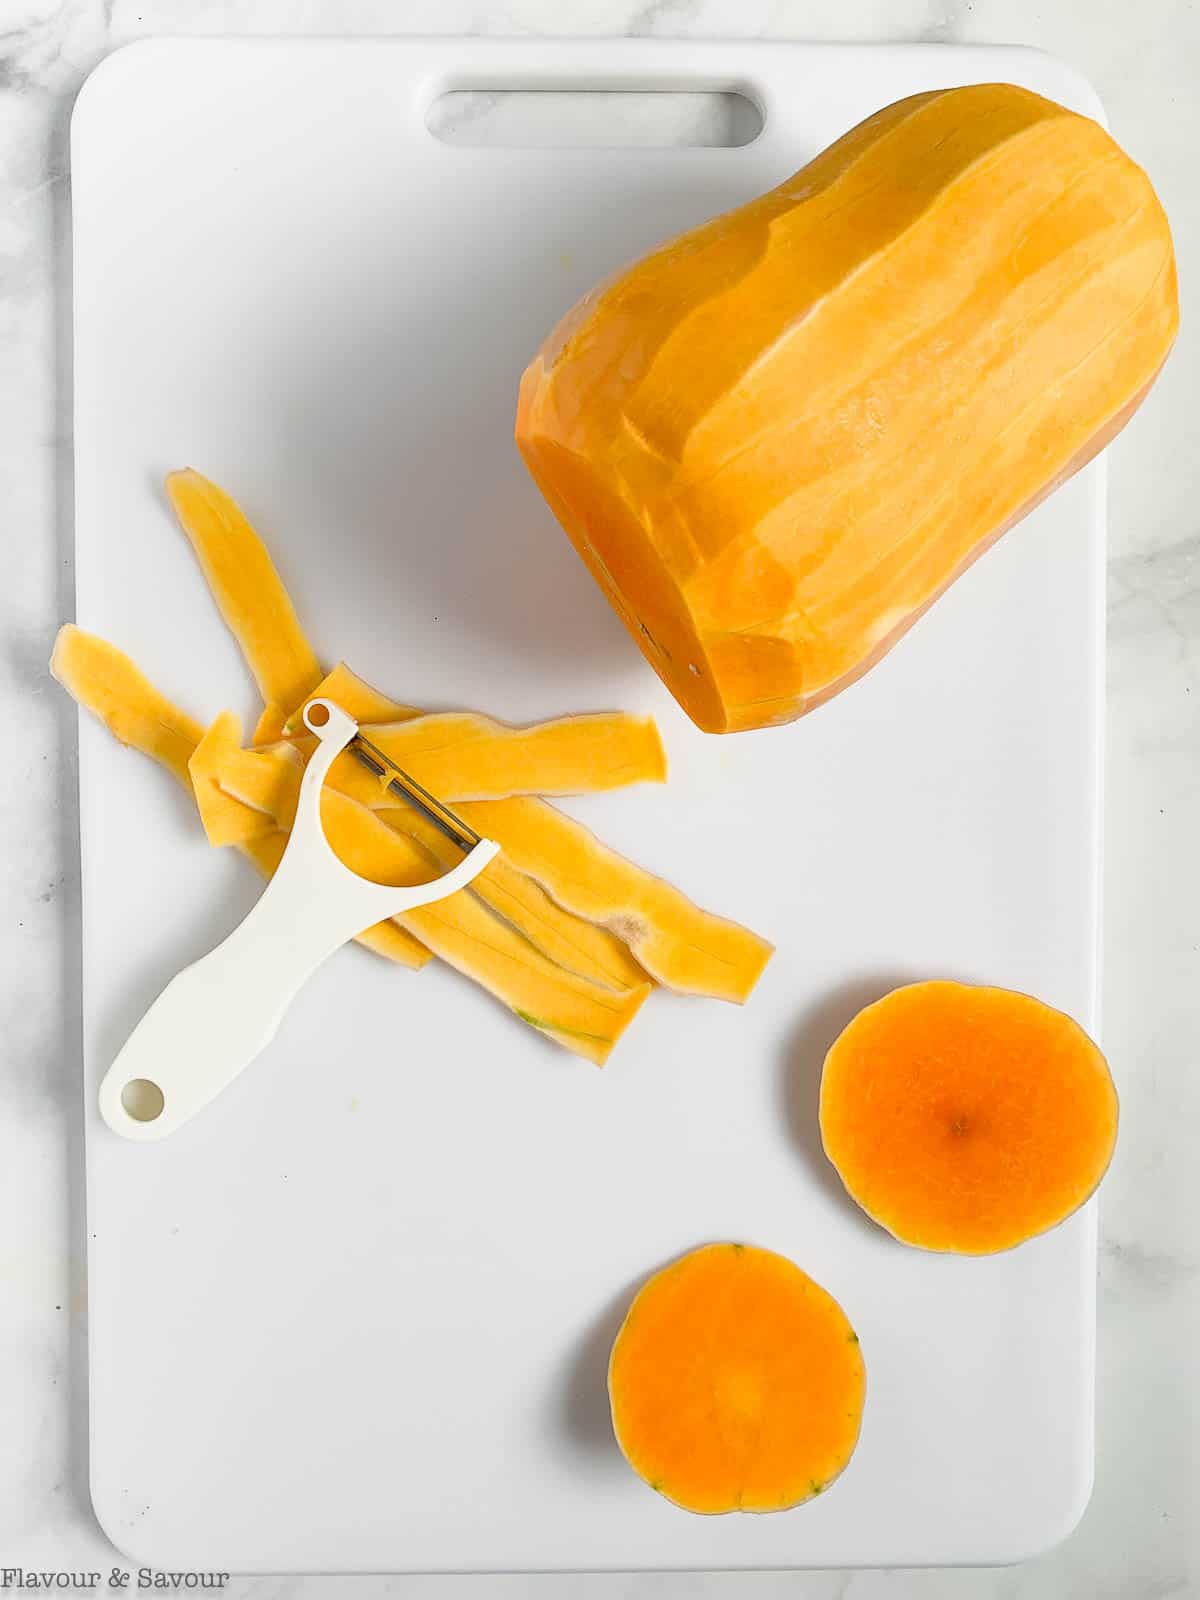 How to cut butternut squash, Step 1: Remove the ends with a sharp knife and peel the skin.